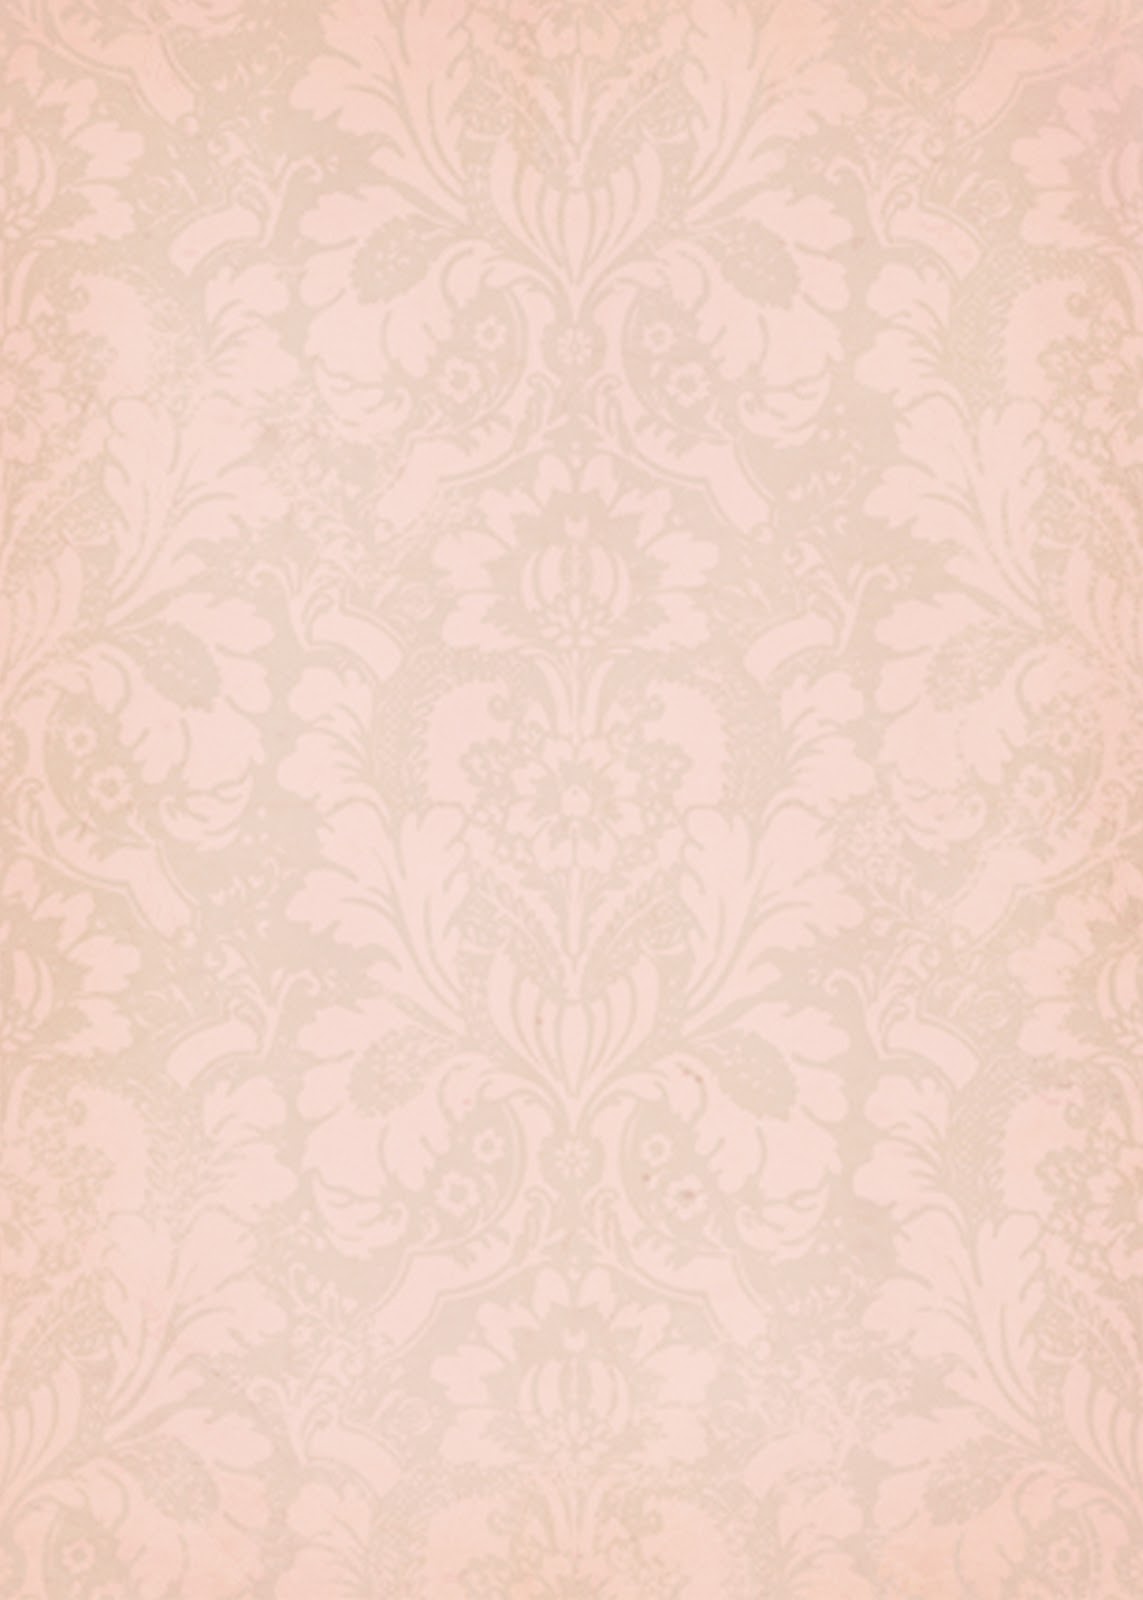 craftluxuries: Free template designs by Irene - light pink damask